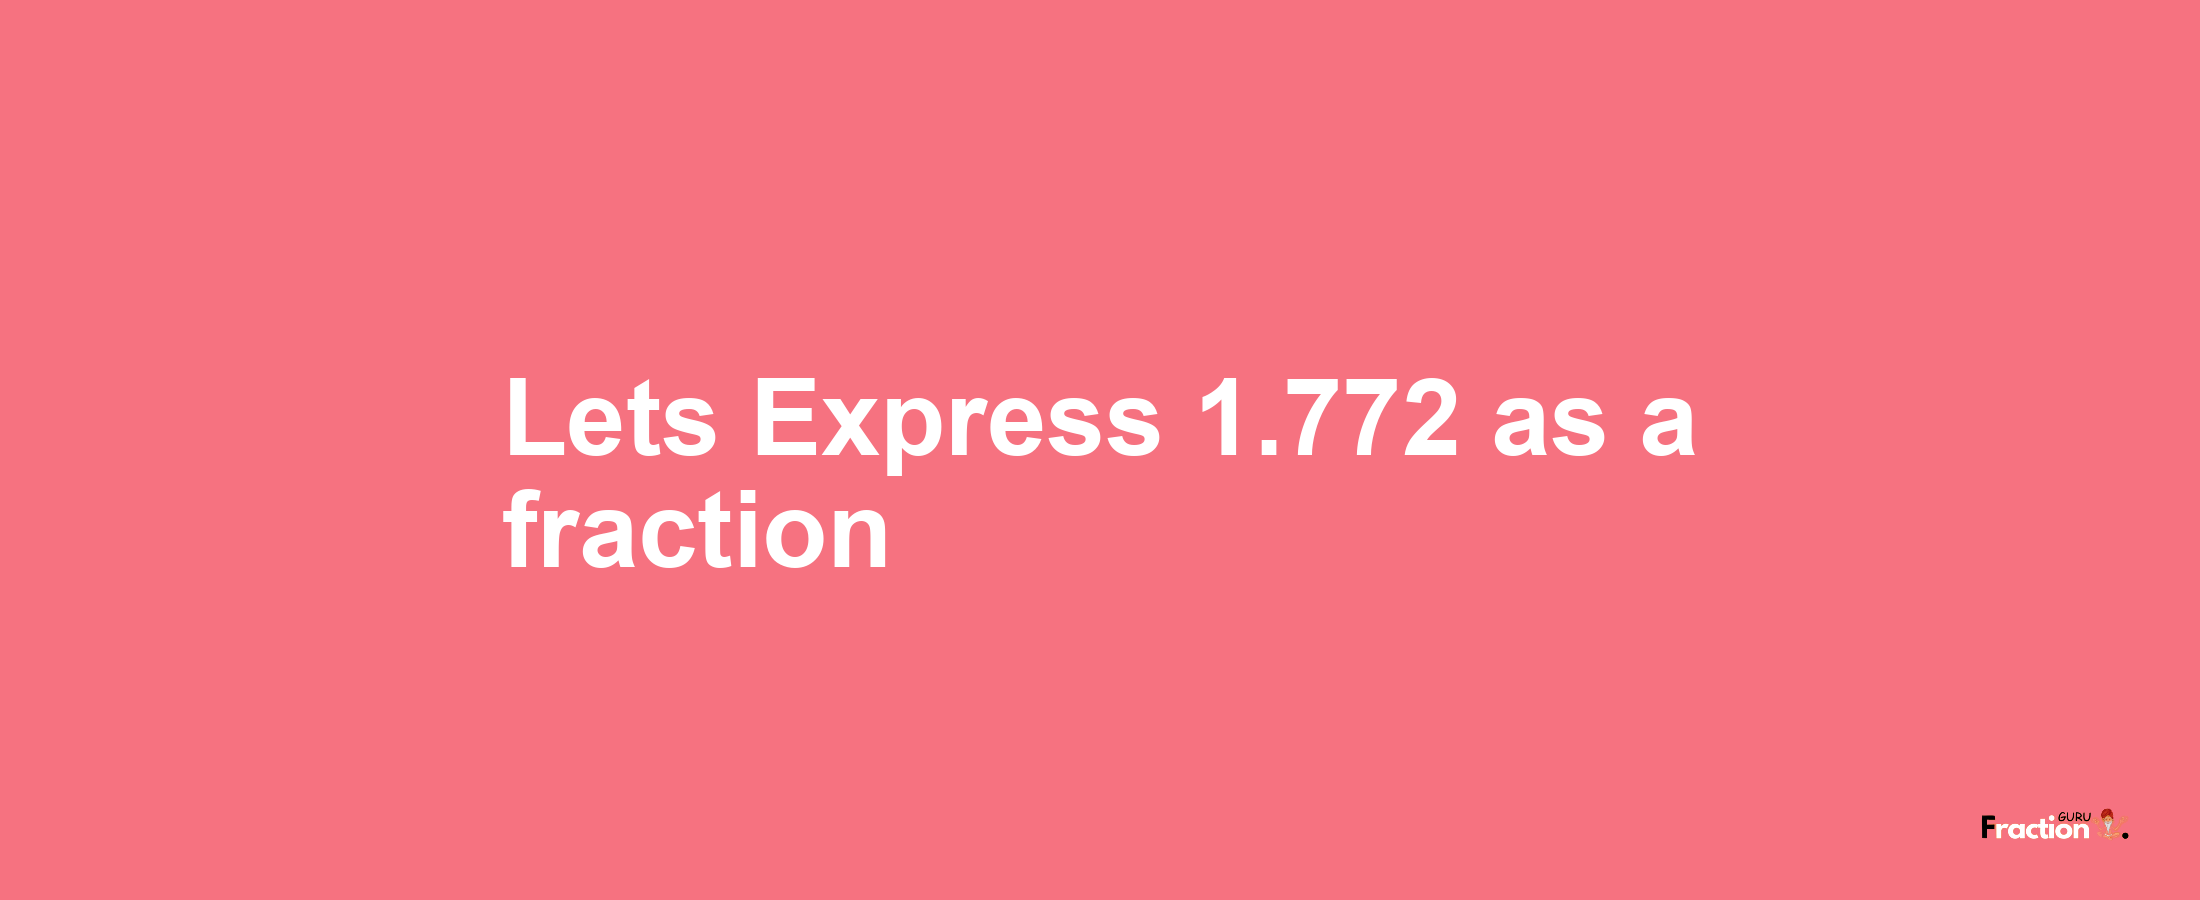 Lets Express 1.772 as afraction